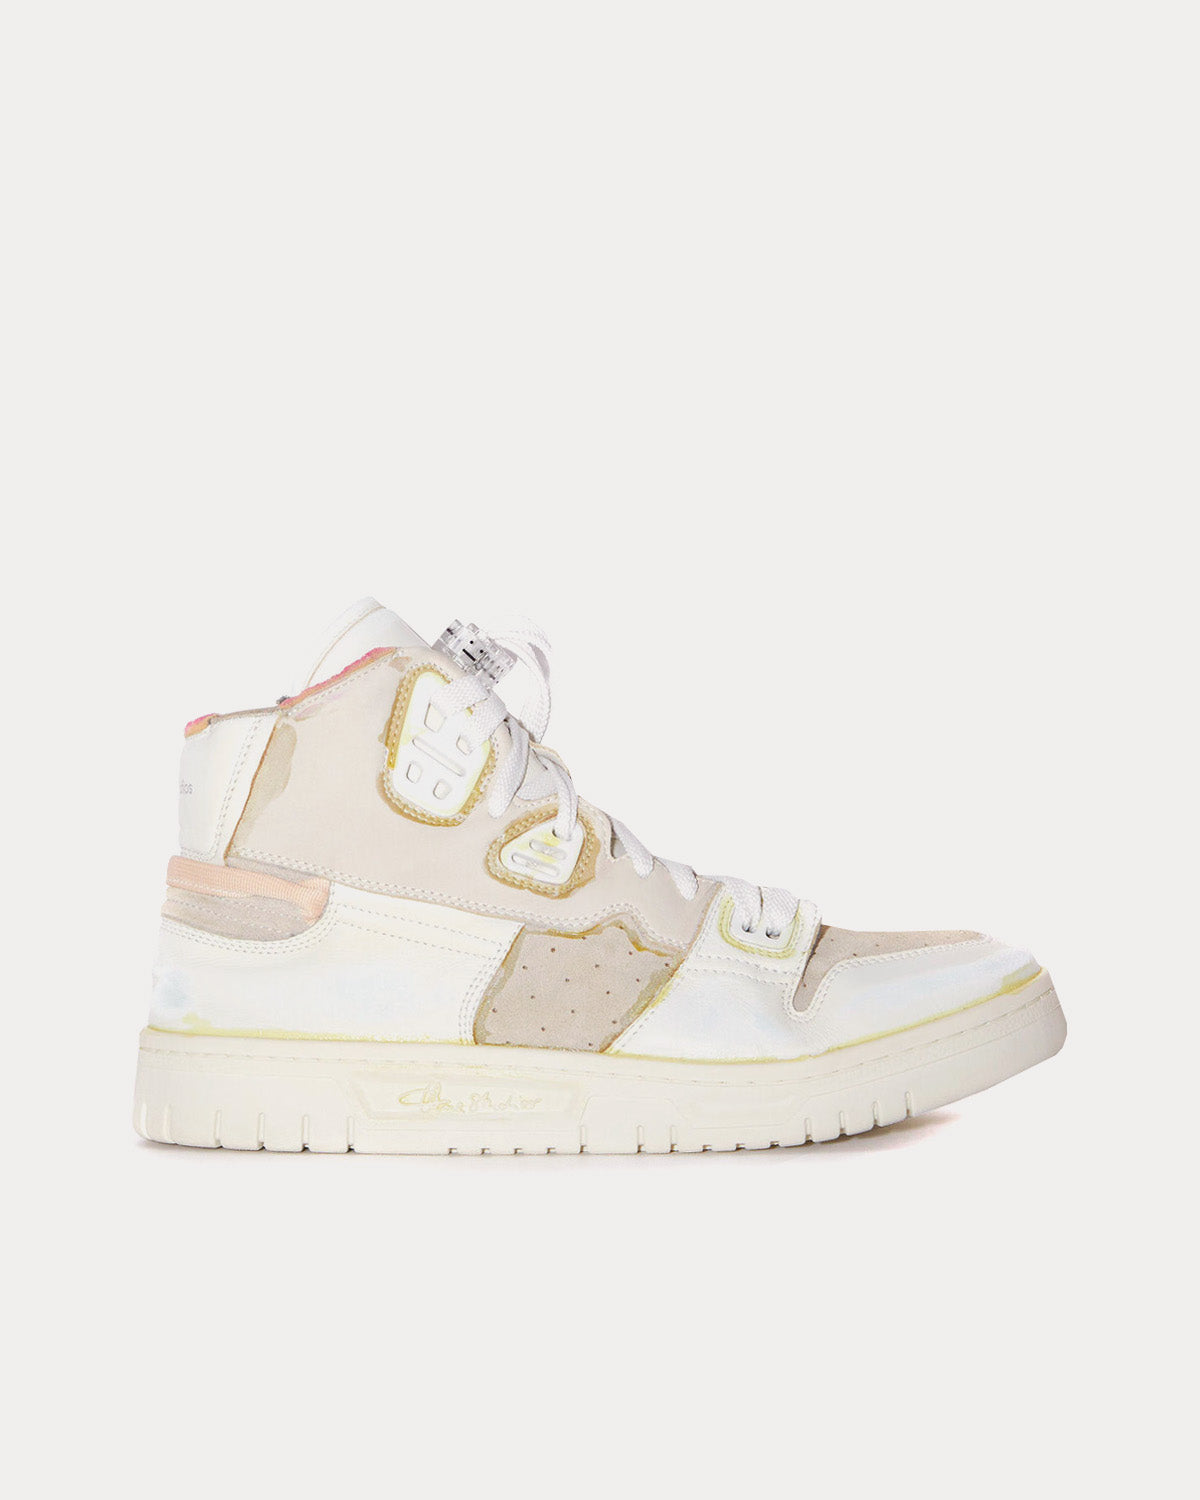 Acne Studios - Destroyed Leather White / Off-White High Top Sneakers